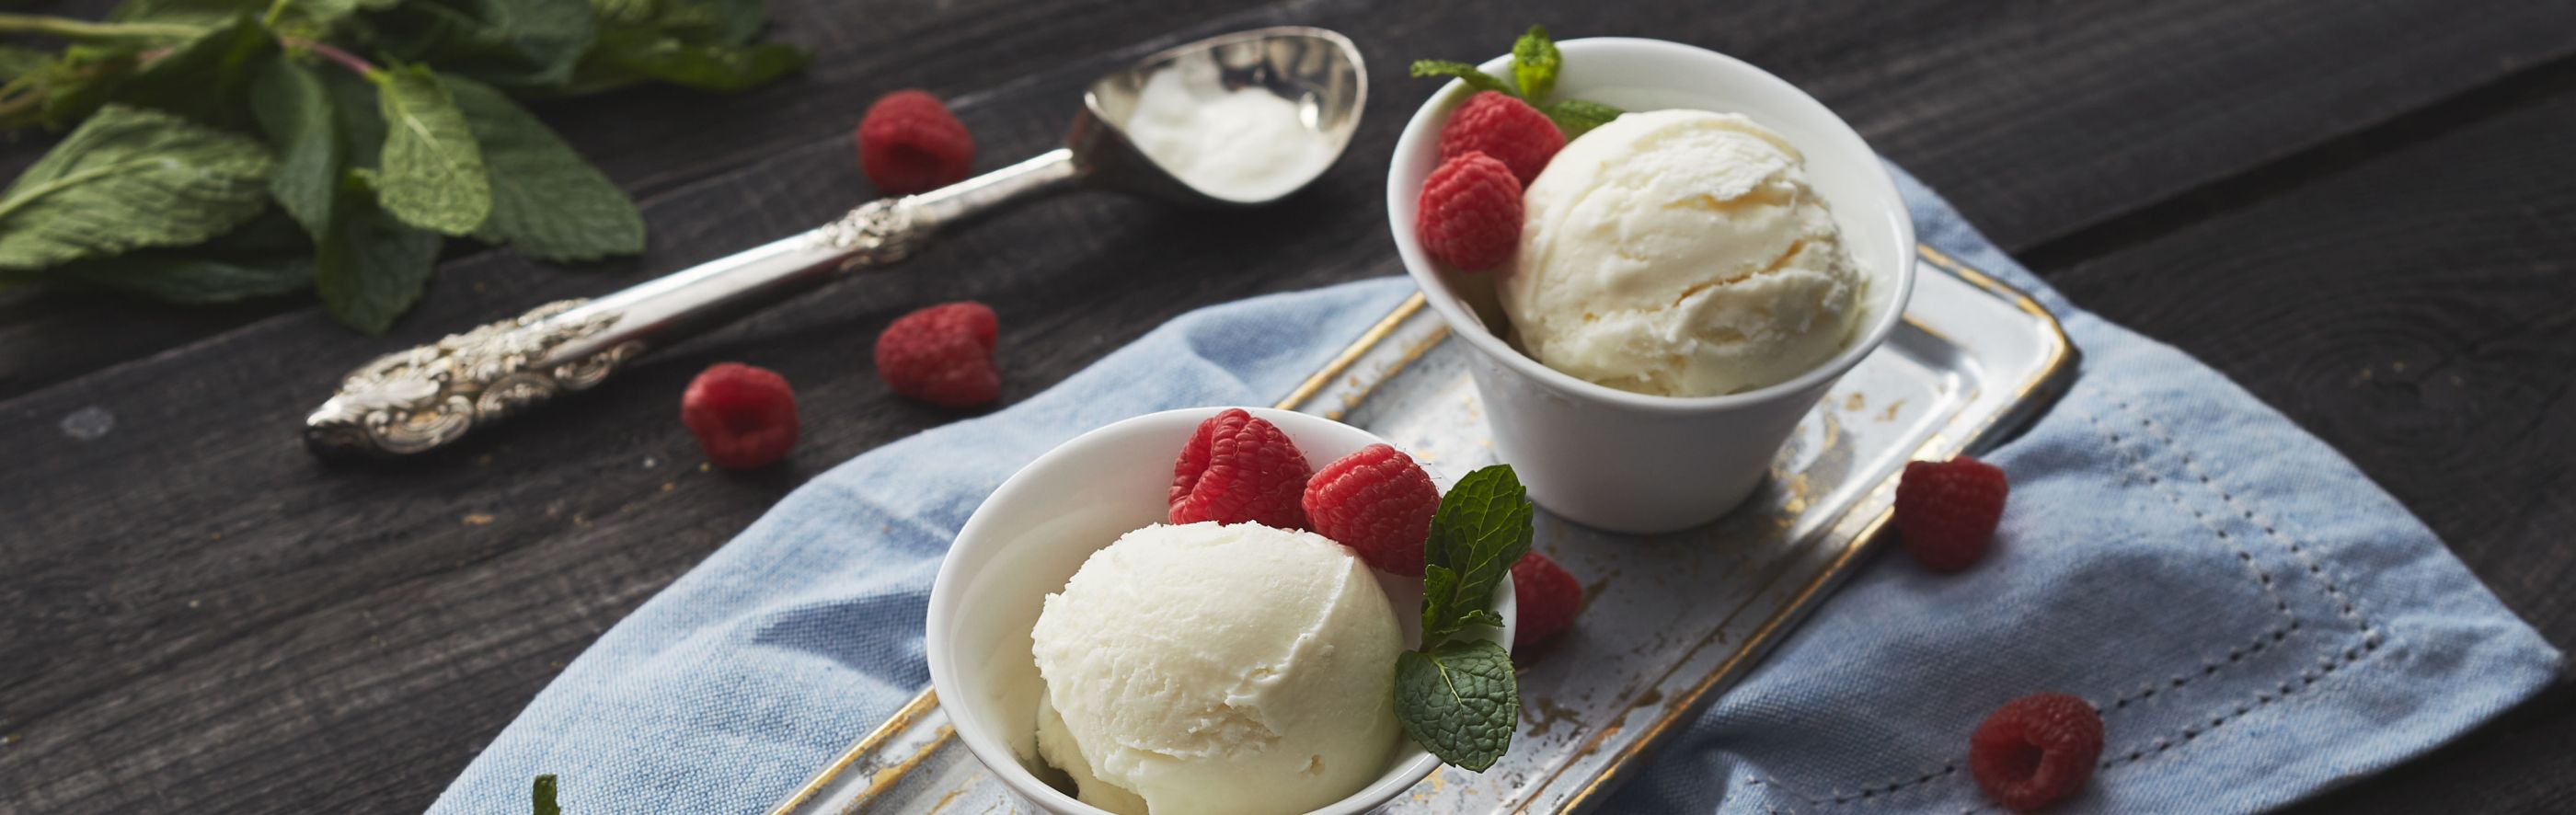 Individual bowls with scoops of vanilla ice cream and fresh raspberries on a table